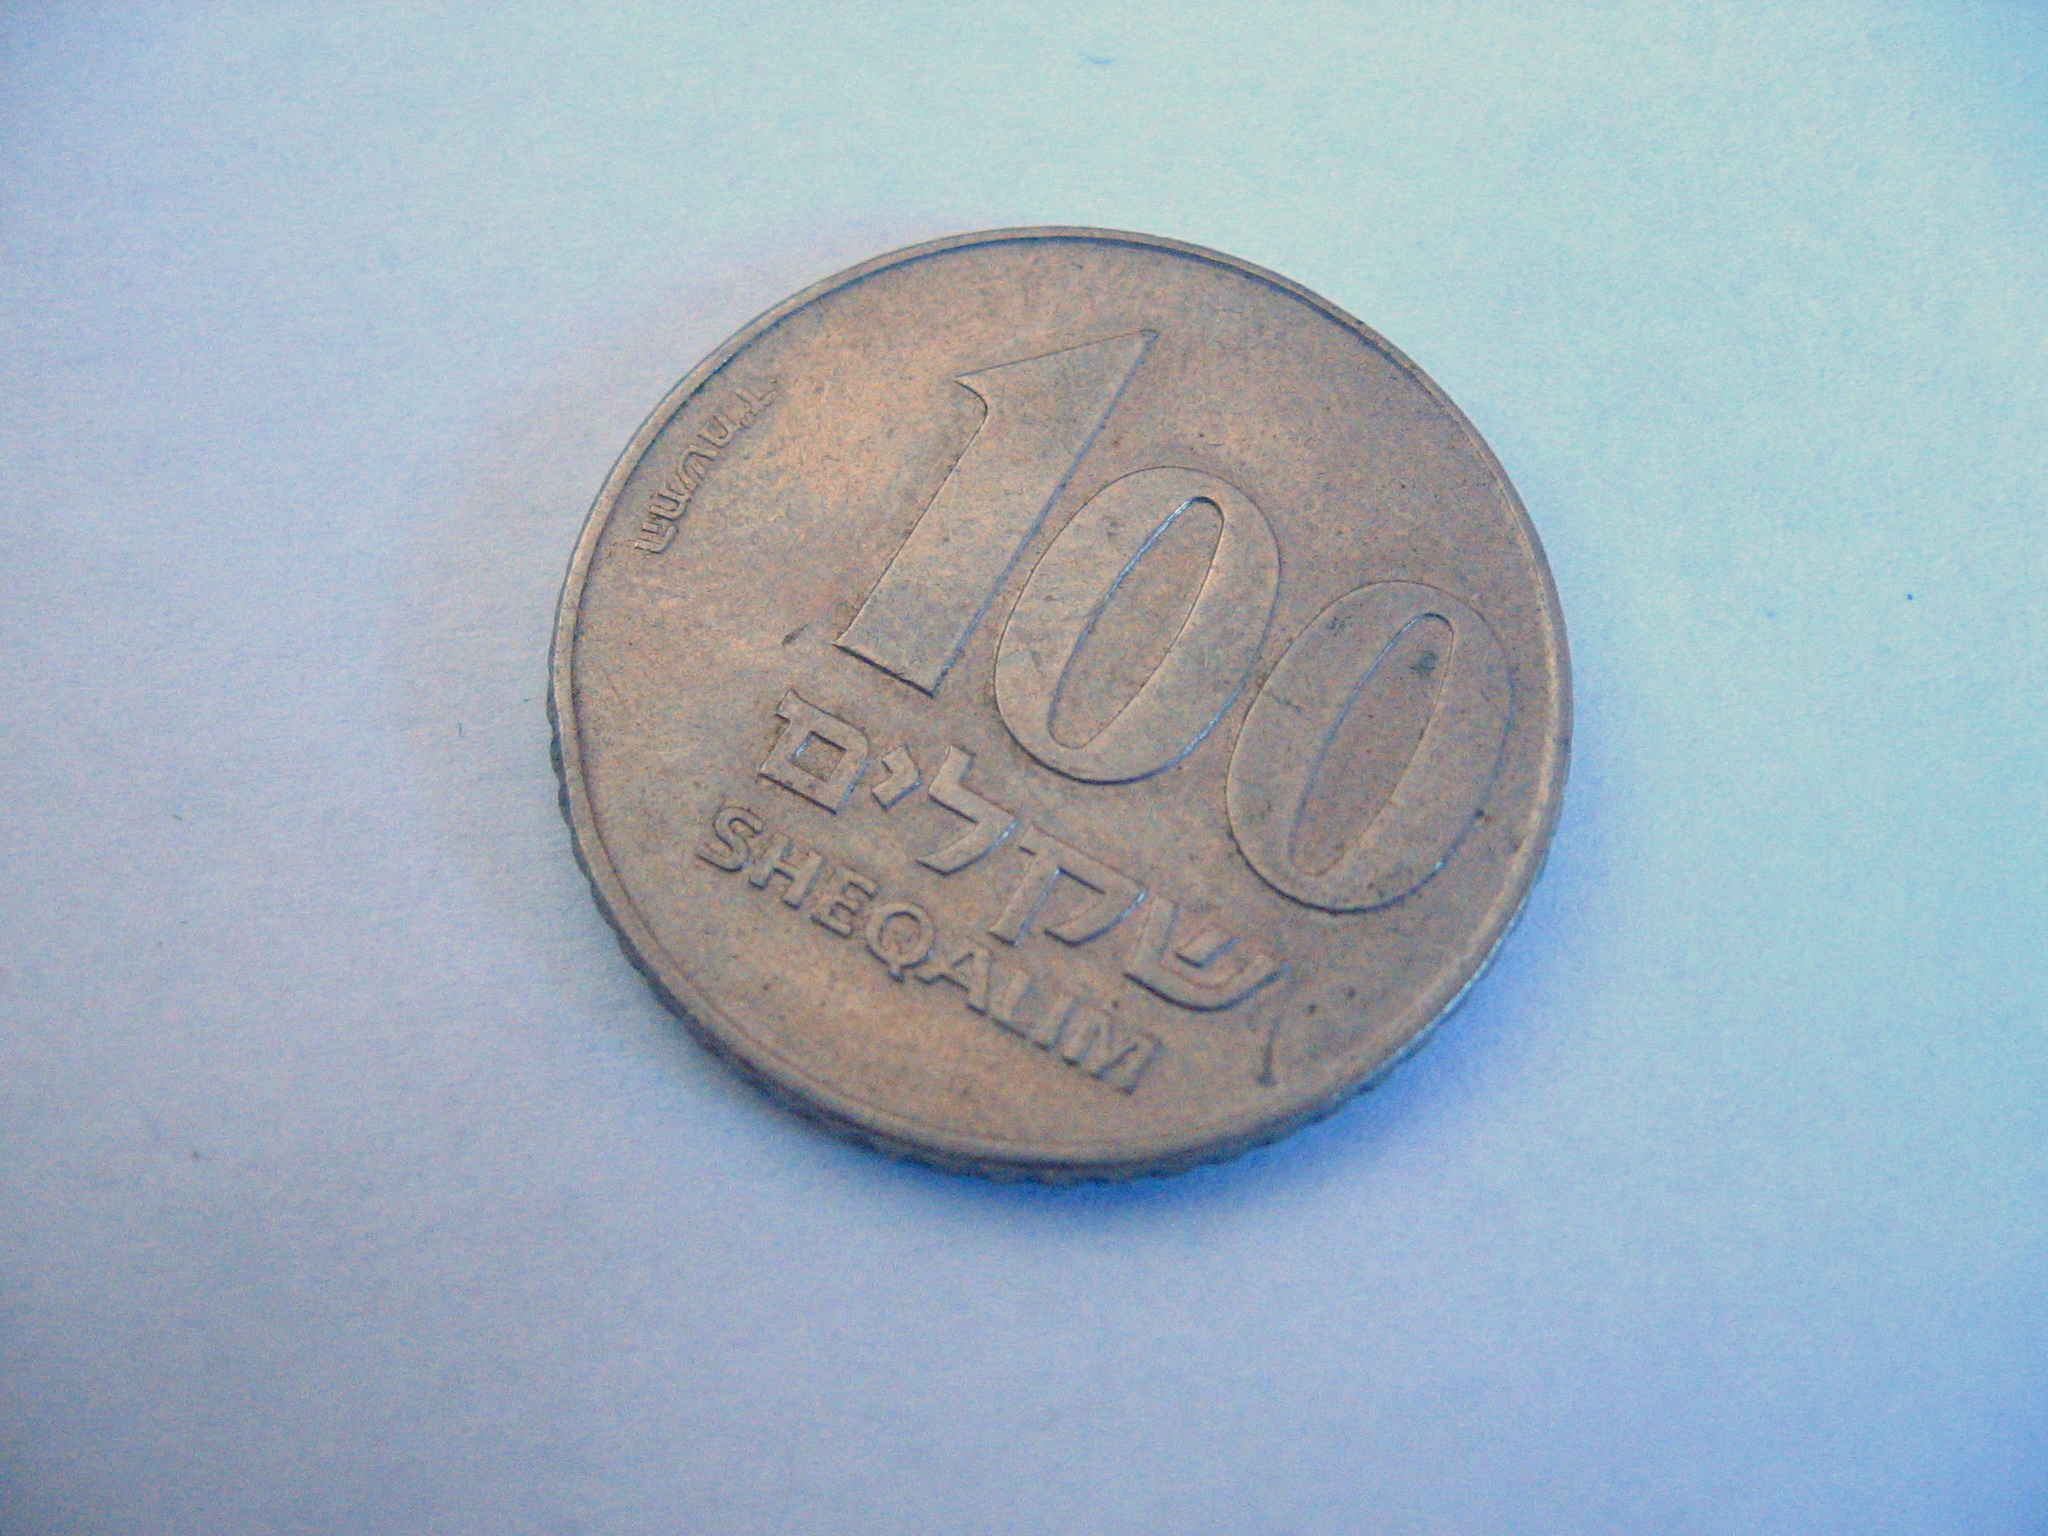 a penny is shown laying on the floor